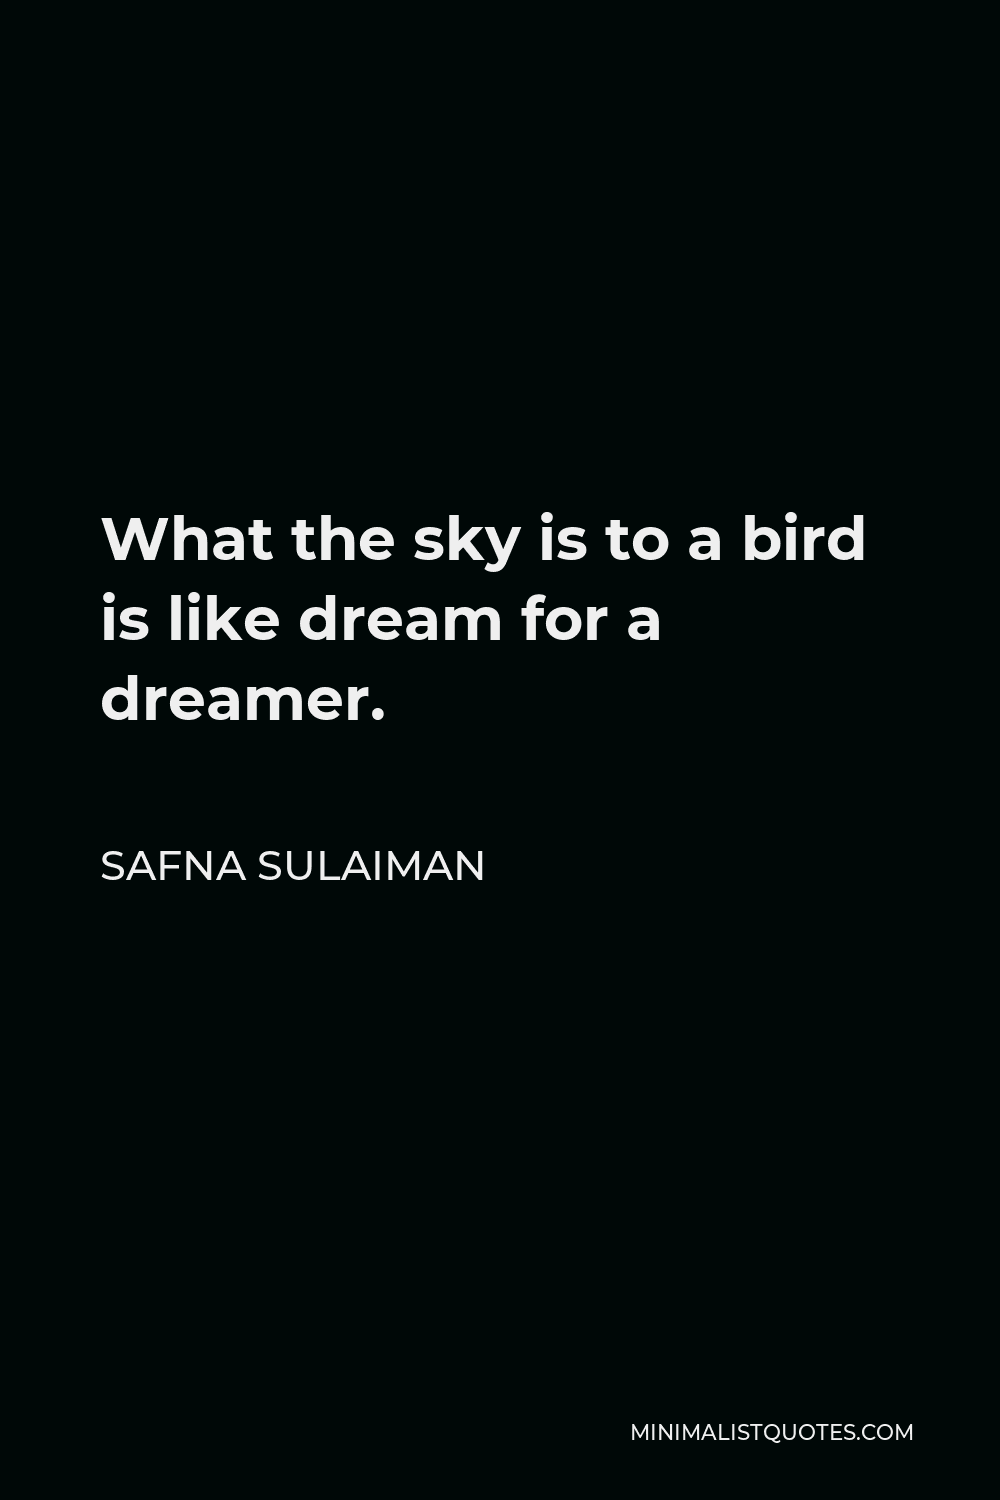 Safna Sulaiman Quote - What the sky is to a bird is like dream for a dreamer.